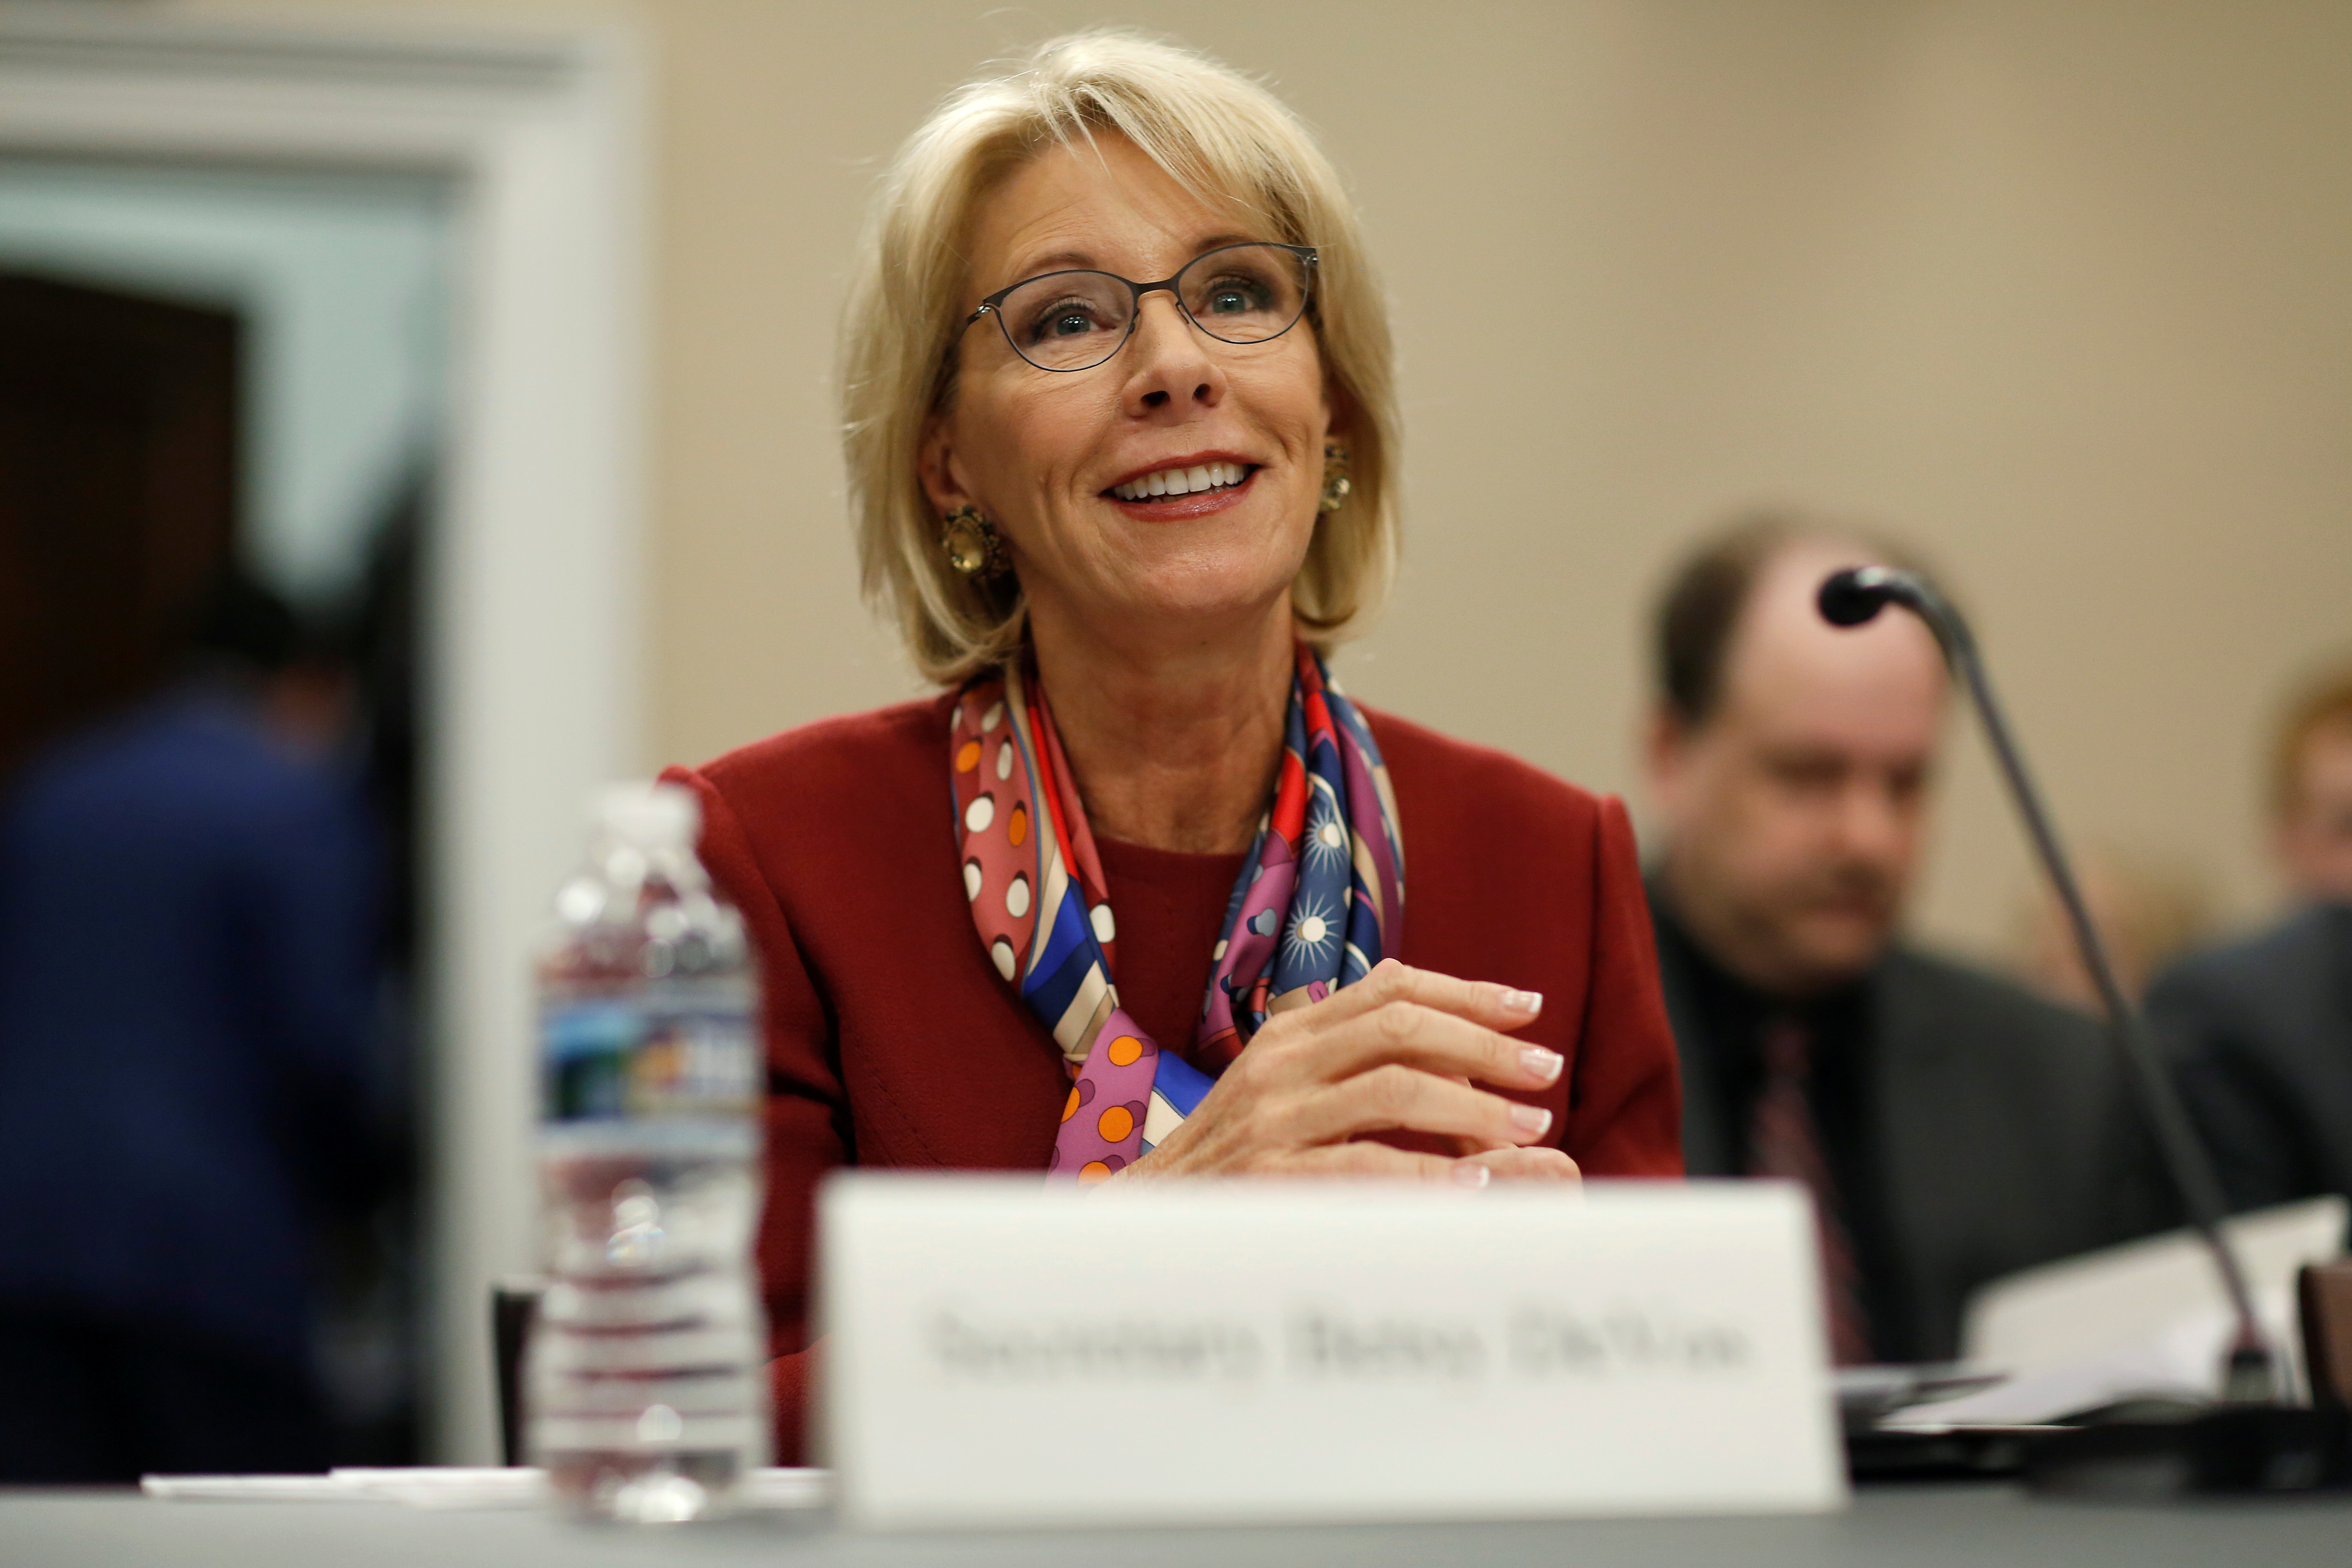 U.S. Secretary of Education Betsy DeVos testifies to the House Appropriations Labor, Health and Human Services, Education, and Related Agencies Subcommittee on the FY2019 budget request for the Department Education on Capitol Hill in Washington, U.S., March 20, 2018. REUTERS/Joshua Roberts